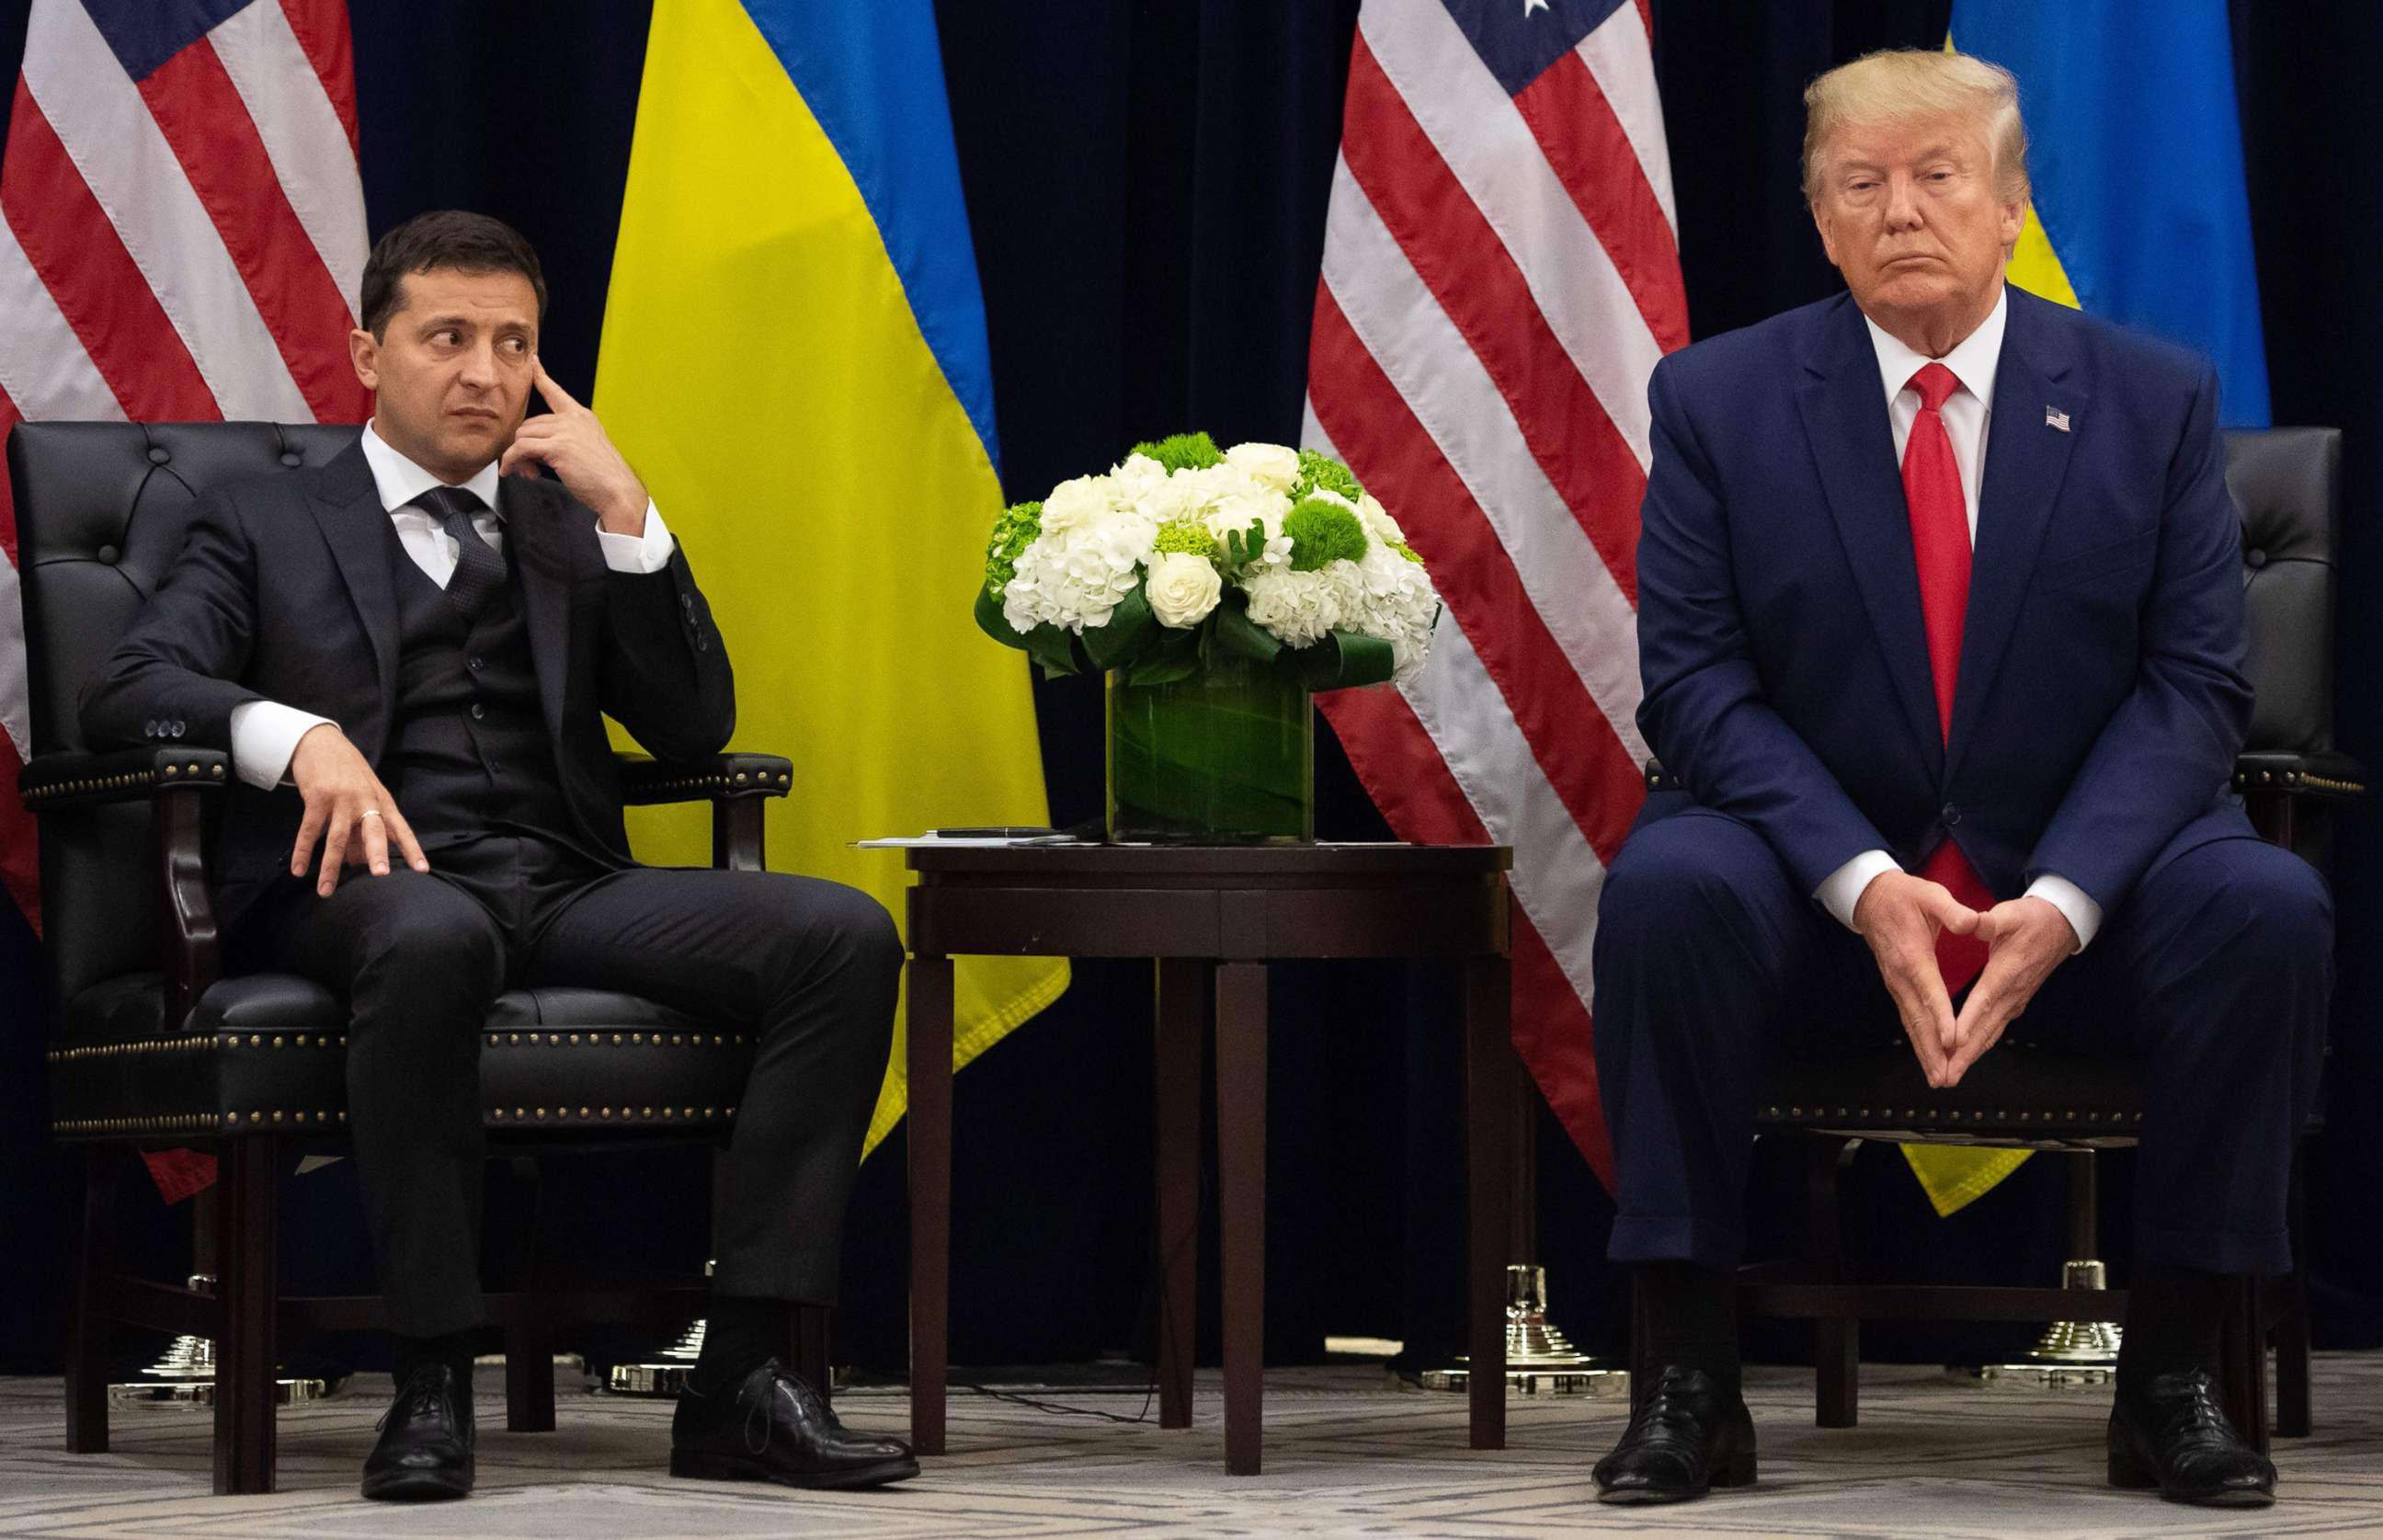 PHOTO: President Donald Trump and Ukrainian President Volodymyr Zelenskyy looks on during a meeting in New York on the sidelines of the United Nations General Assembly on Sept. 25, 2019.